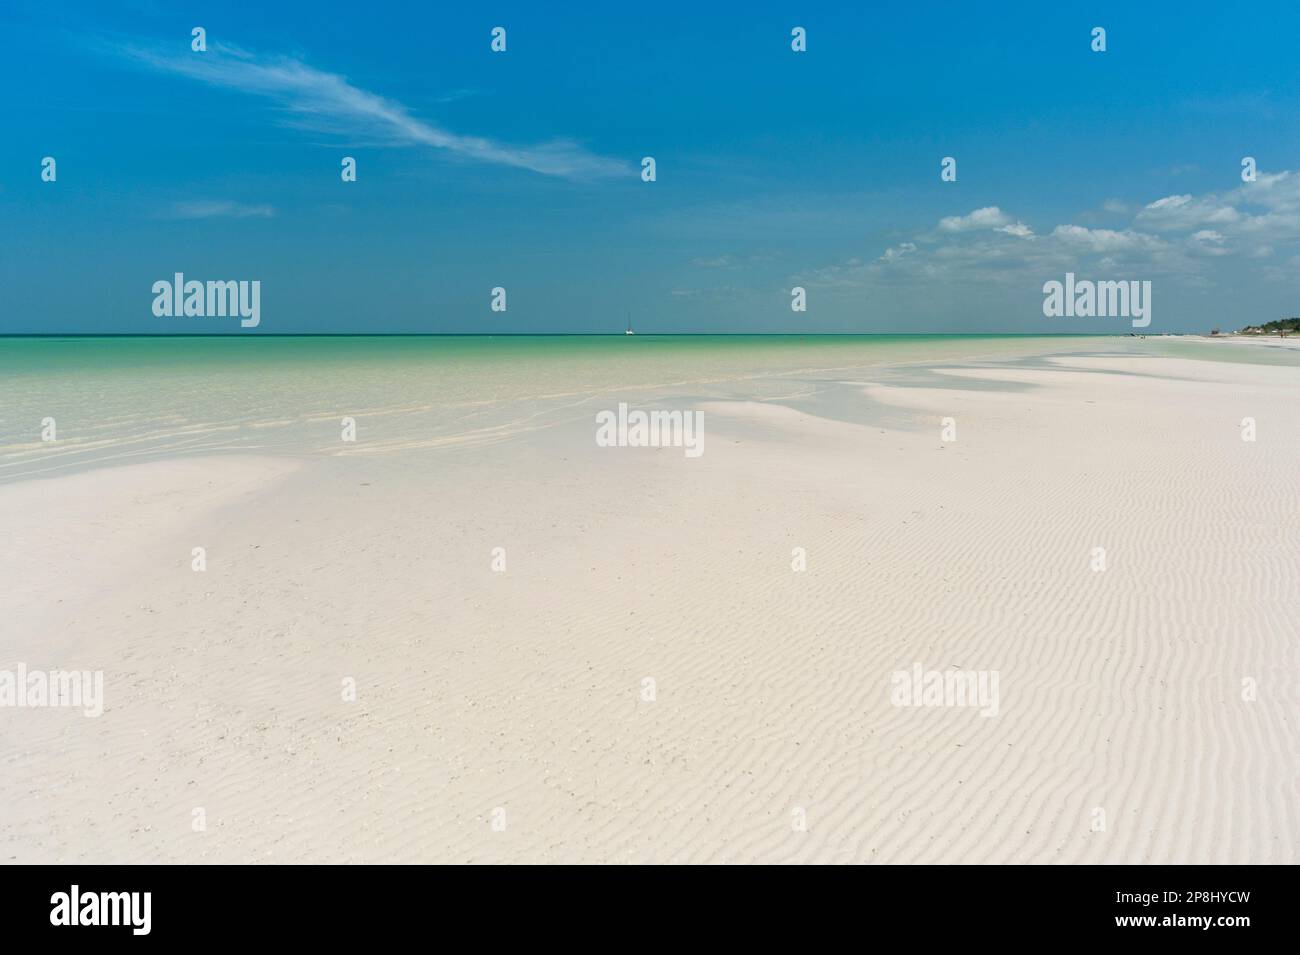 A panoramic view of a deserted white sand tropical beach with a blue sky, perfect for relaxing and rejuvenating. Stock Photo